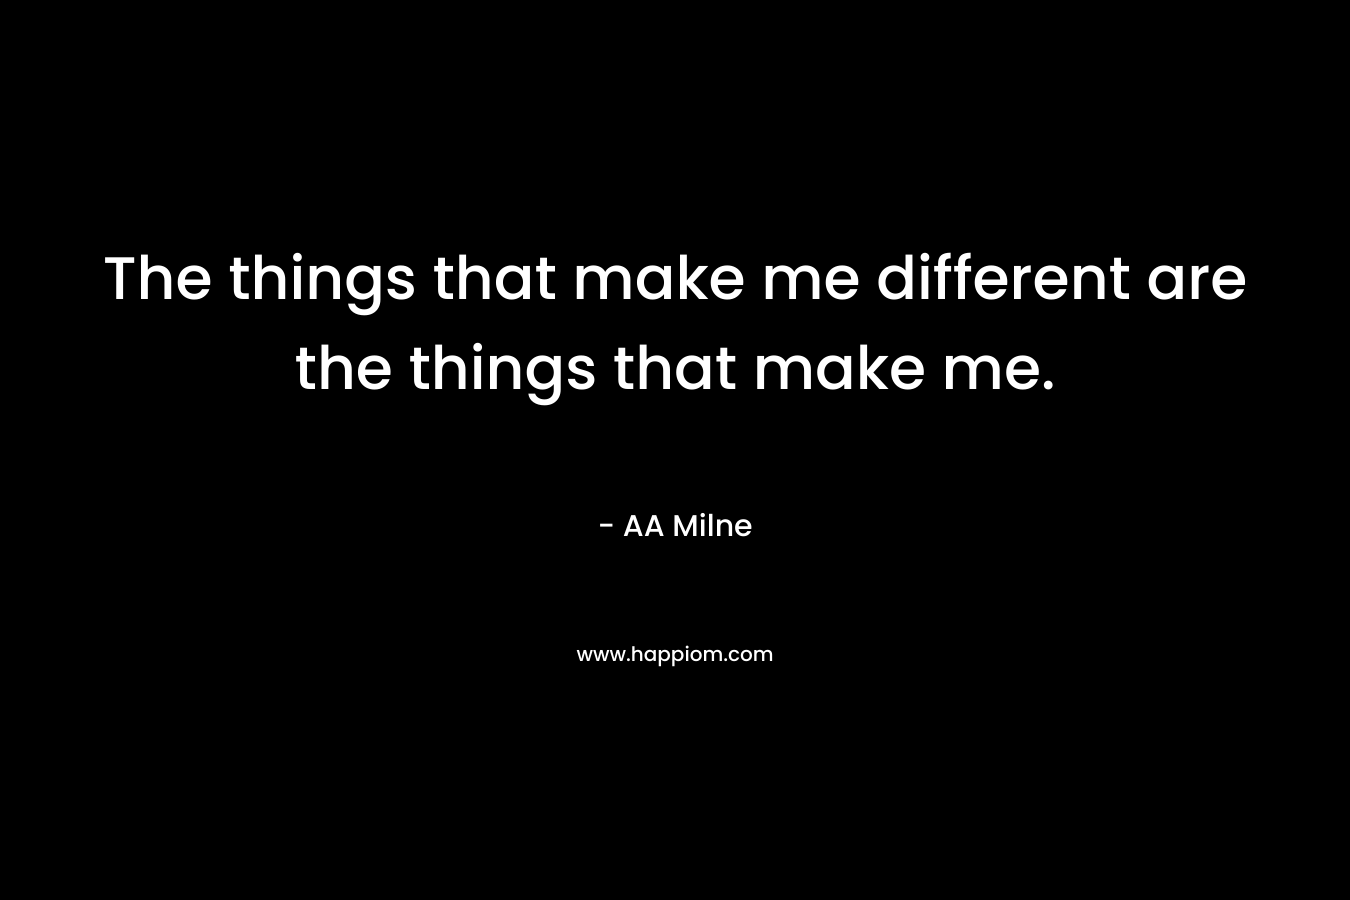 The things that make me different are the things that make me. – AA Milne